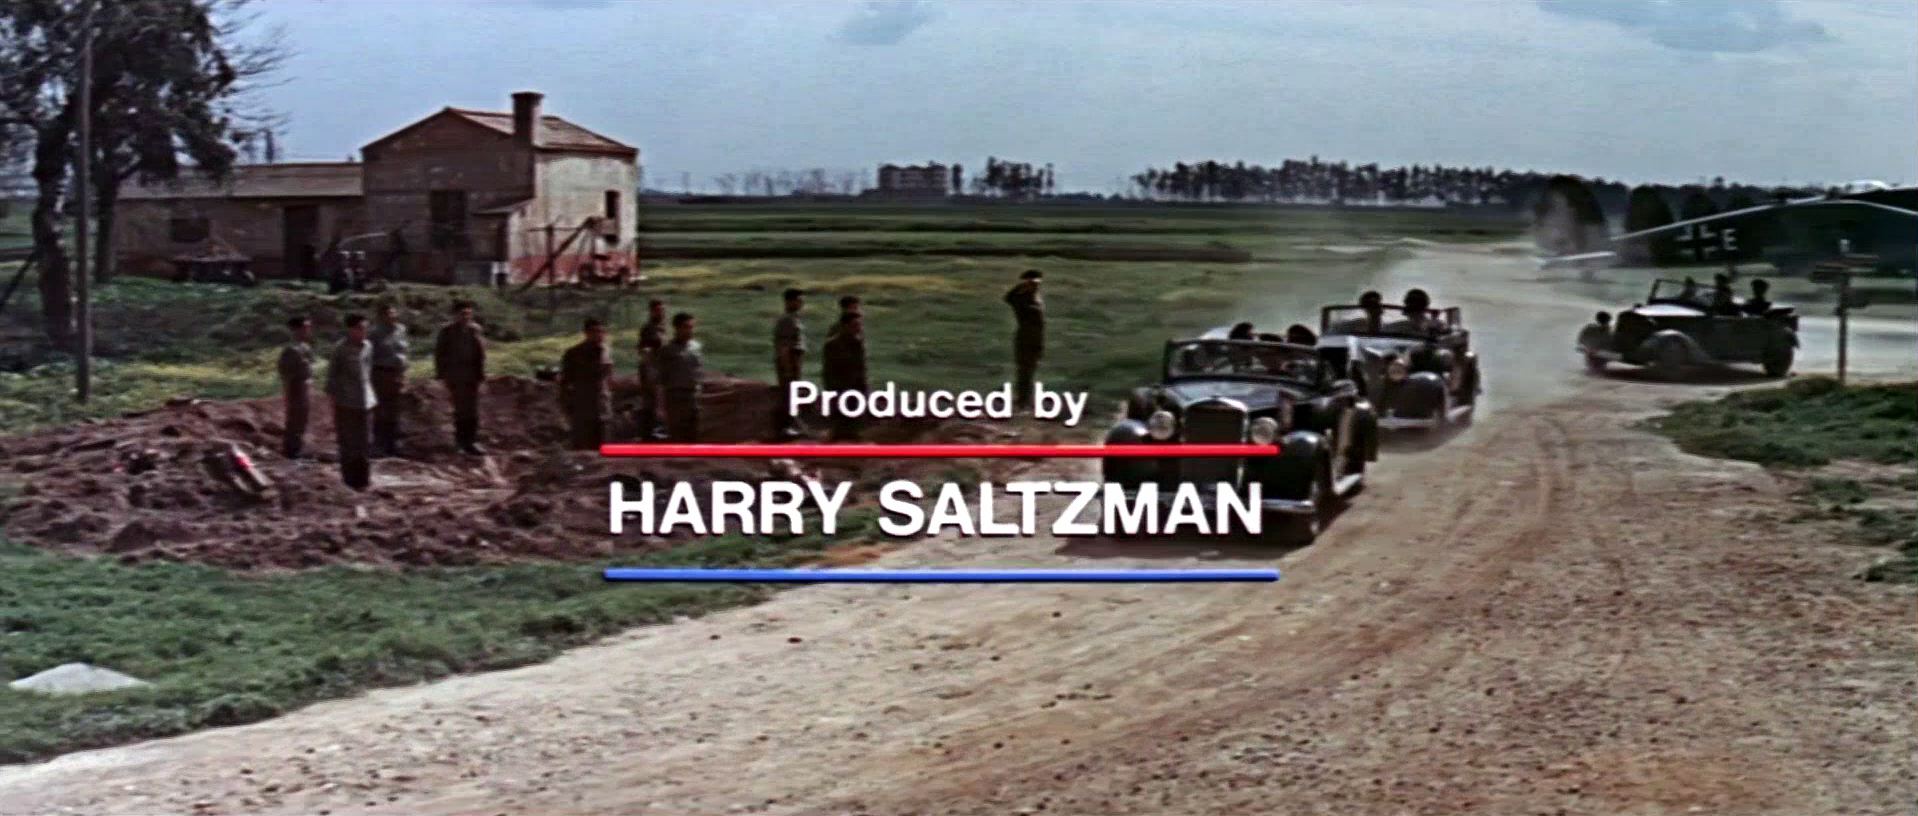 Main title from Battle of Britain (1969) (27). Produced by Harry Saltzman